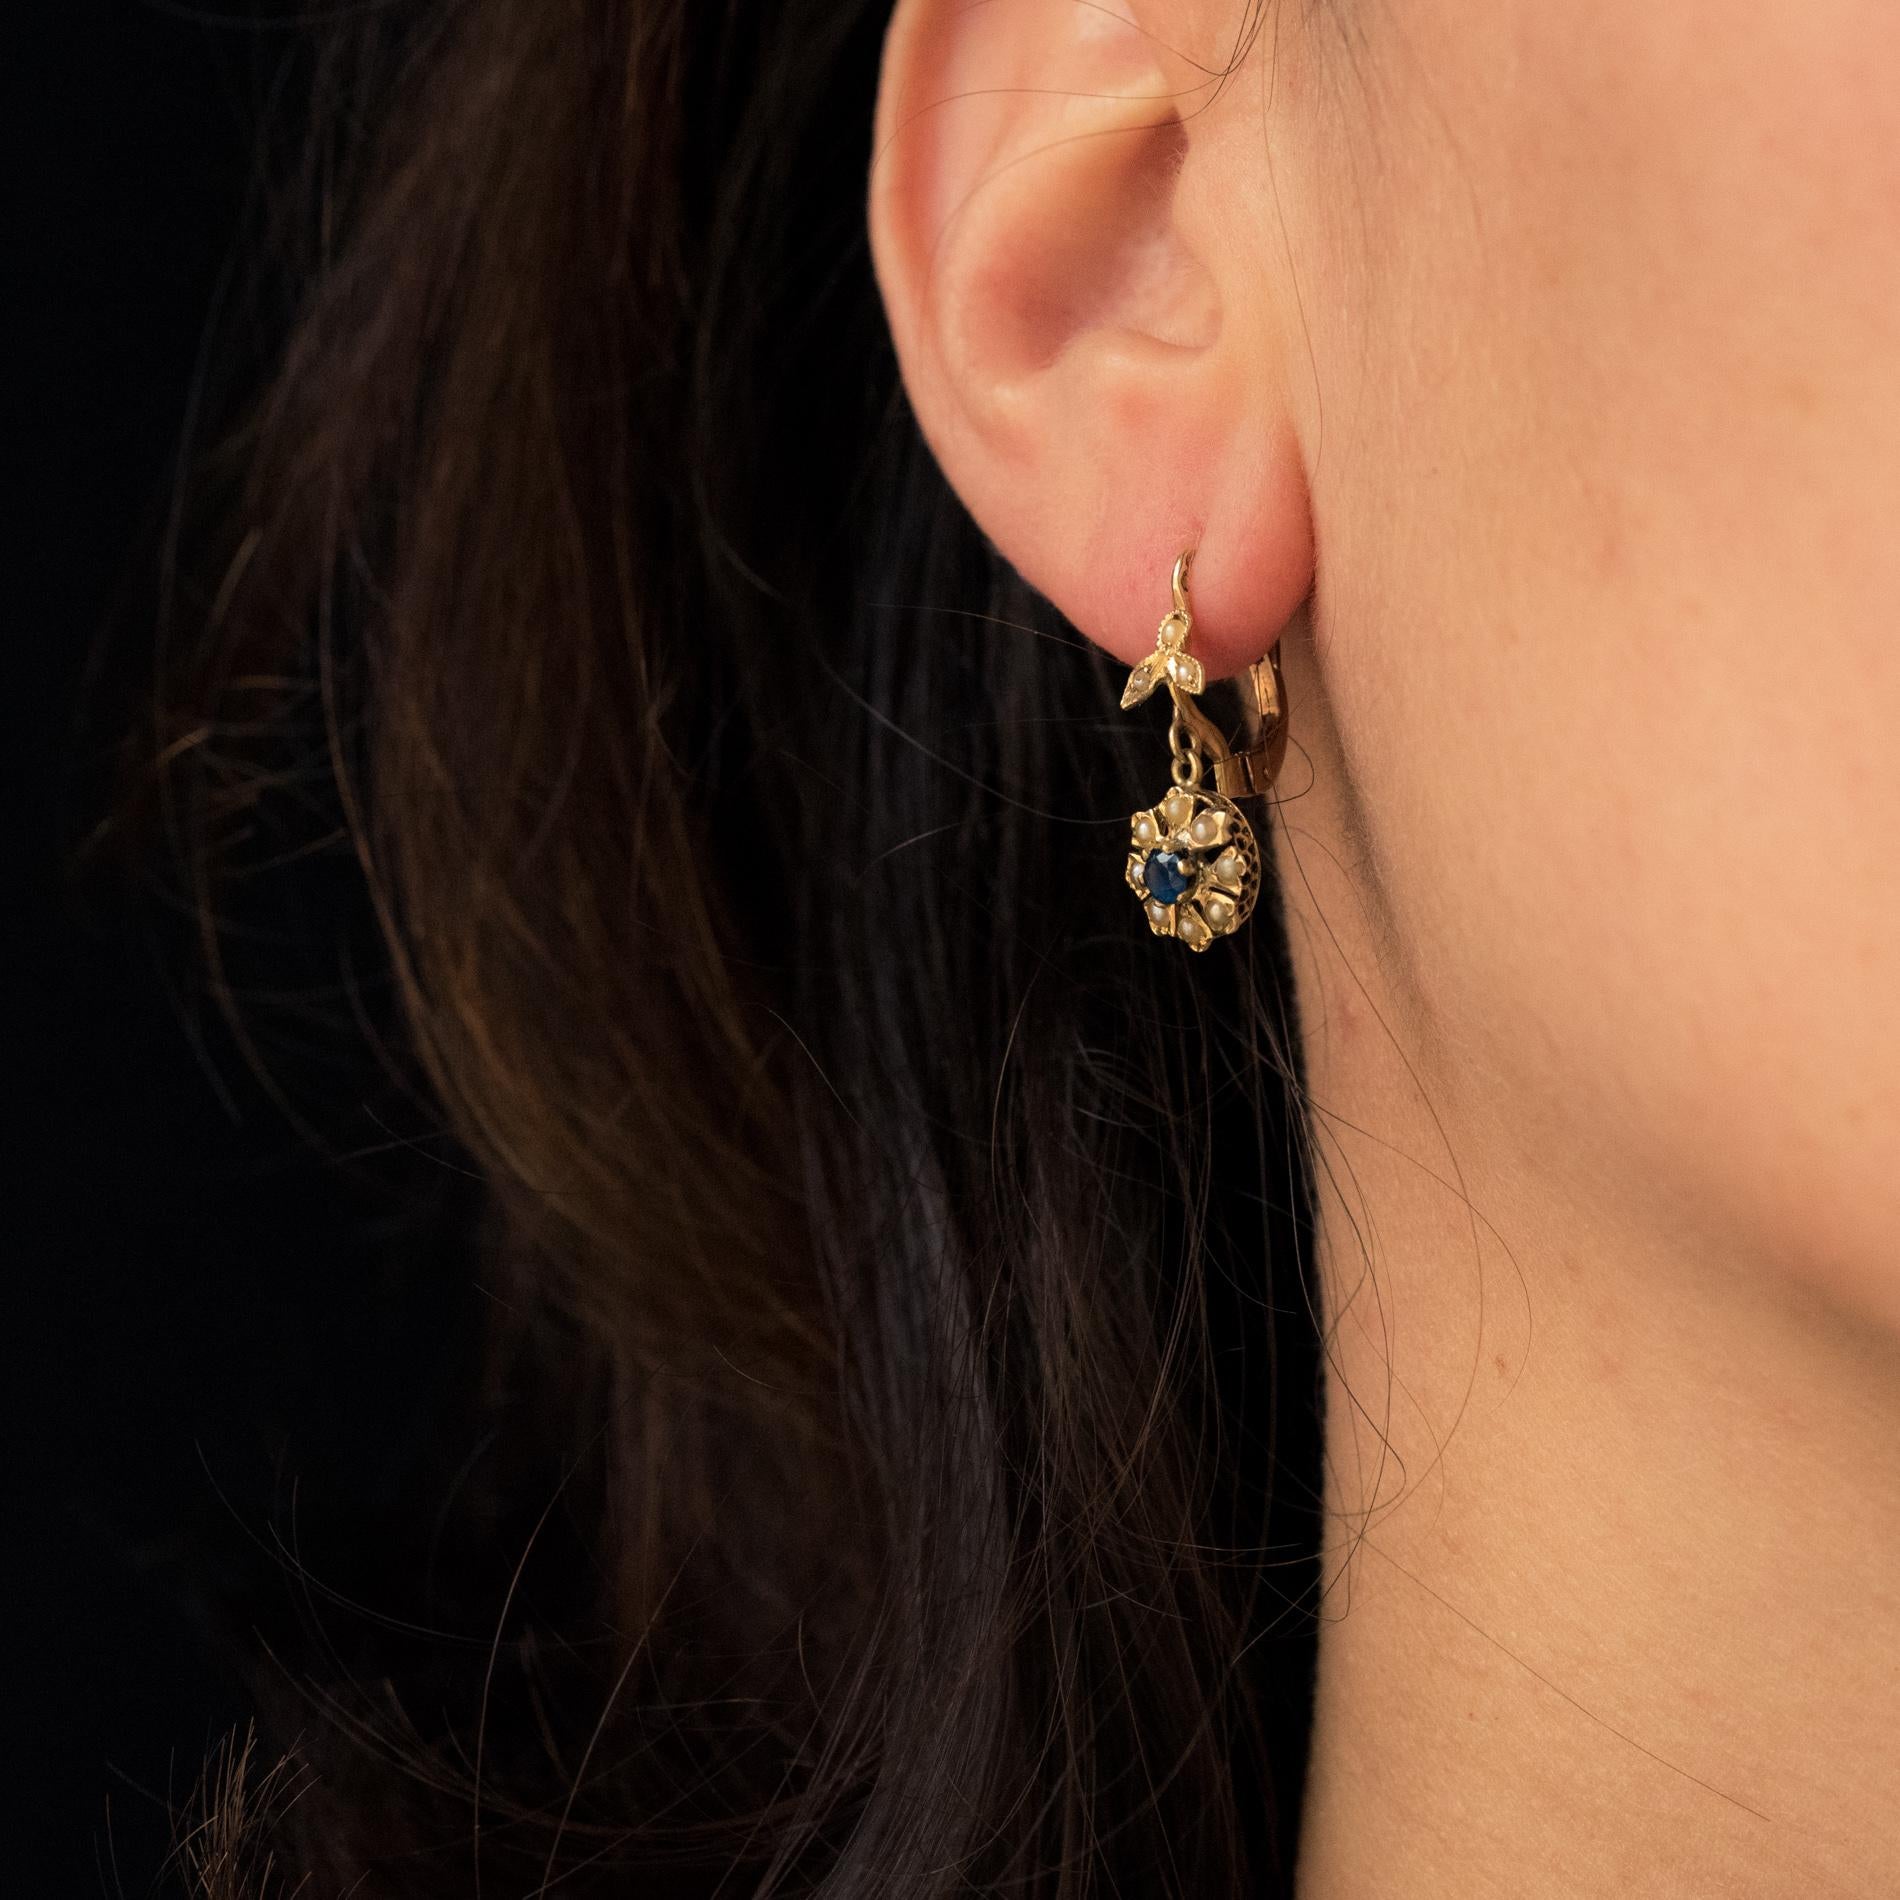 For pierced ears.
Earrings in 18 karat yellow gold, eagle's head hallmark.
Lovely antique ear pendants, they consist of a leaf motif each set with 3 natural half-pearls. It retains a floral motif set in the center and with claws of a sapphire